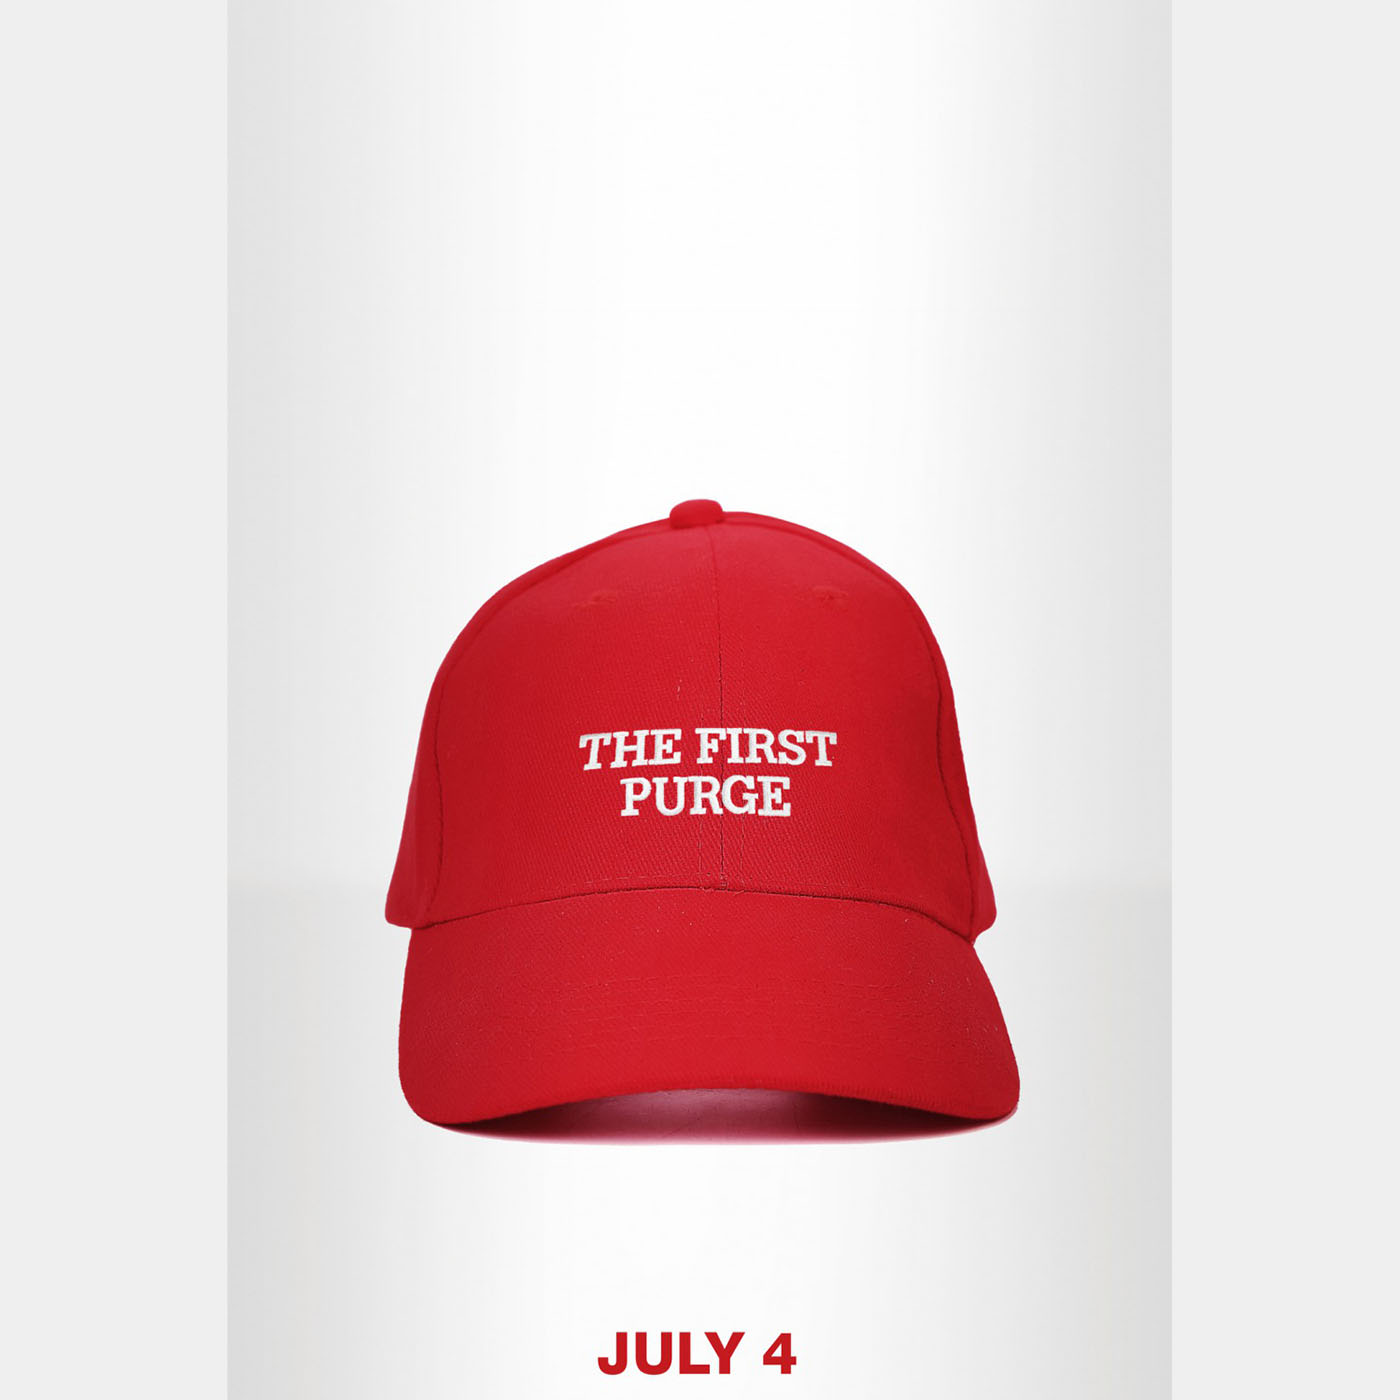 Episode #30: The First Purge